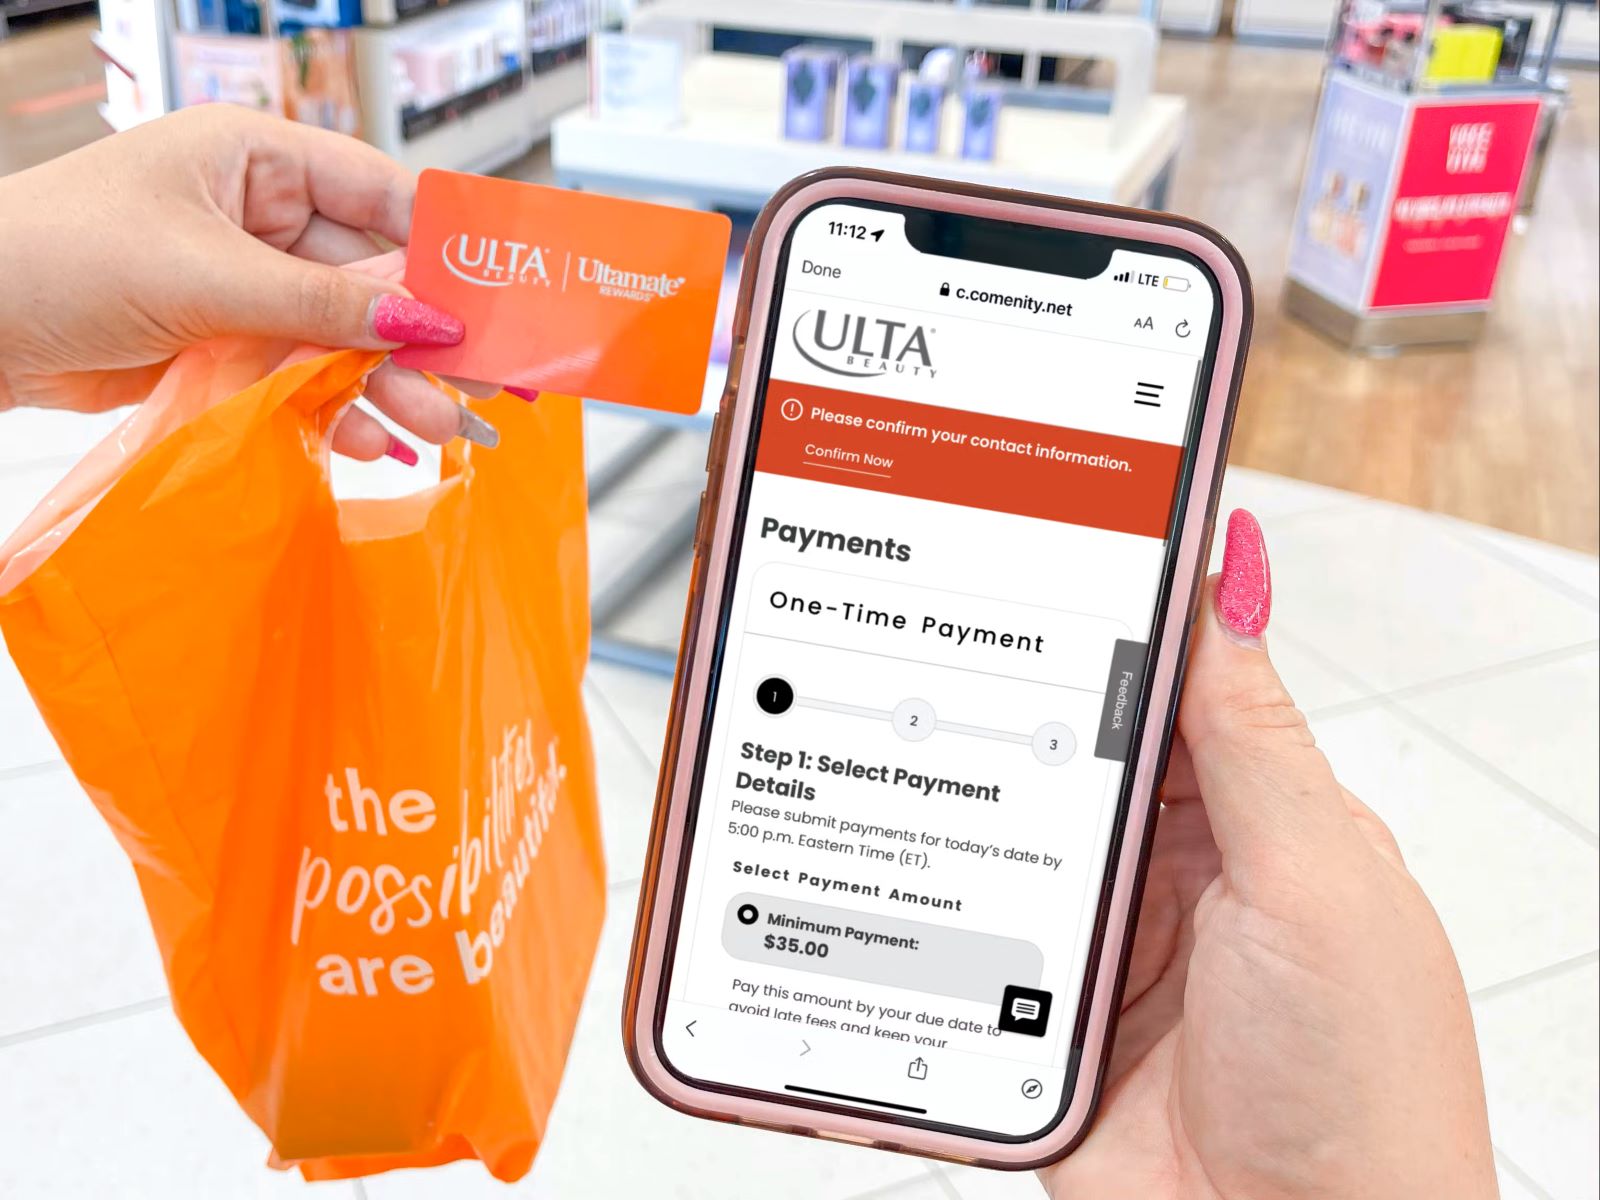 How To Pay Off Ulta Credit Card